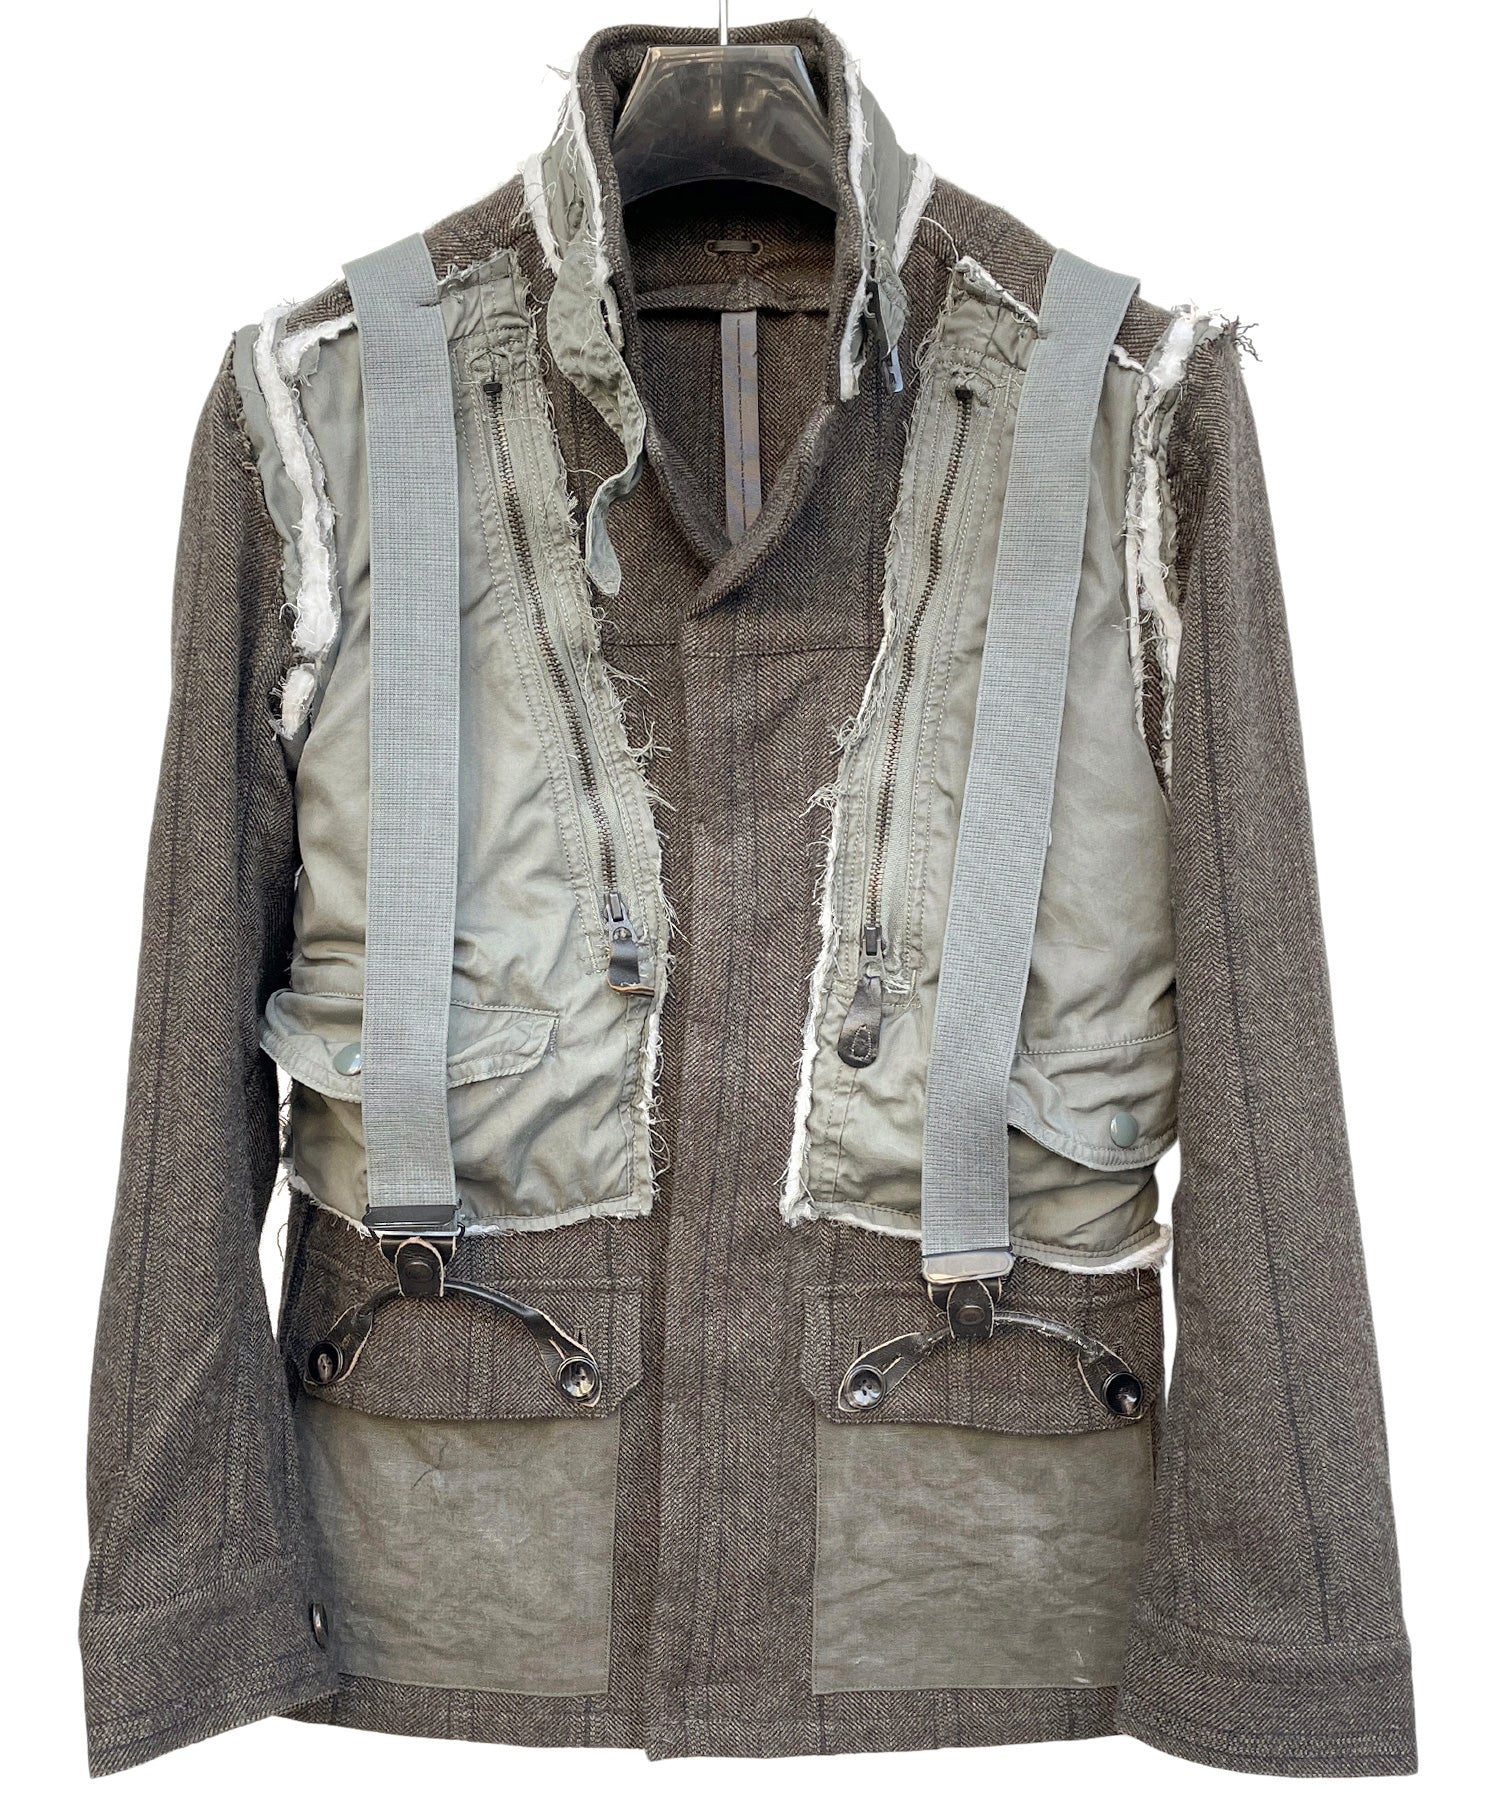 Load image into Gallery viewer, [One-of-a-kind item] Remake parachute jacket / KHAKI / M size